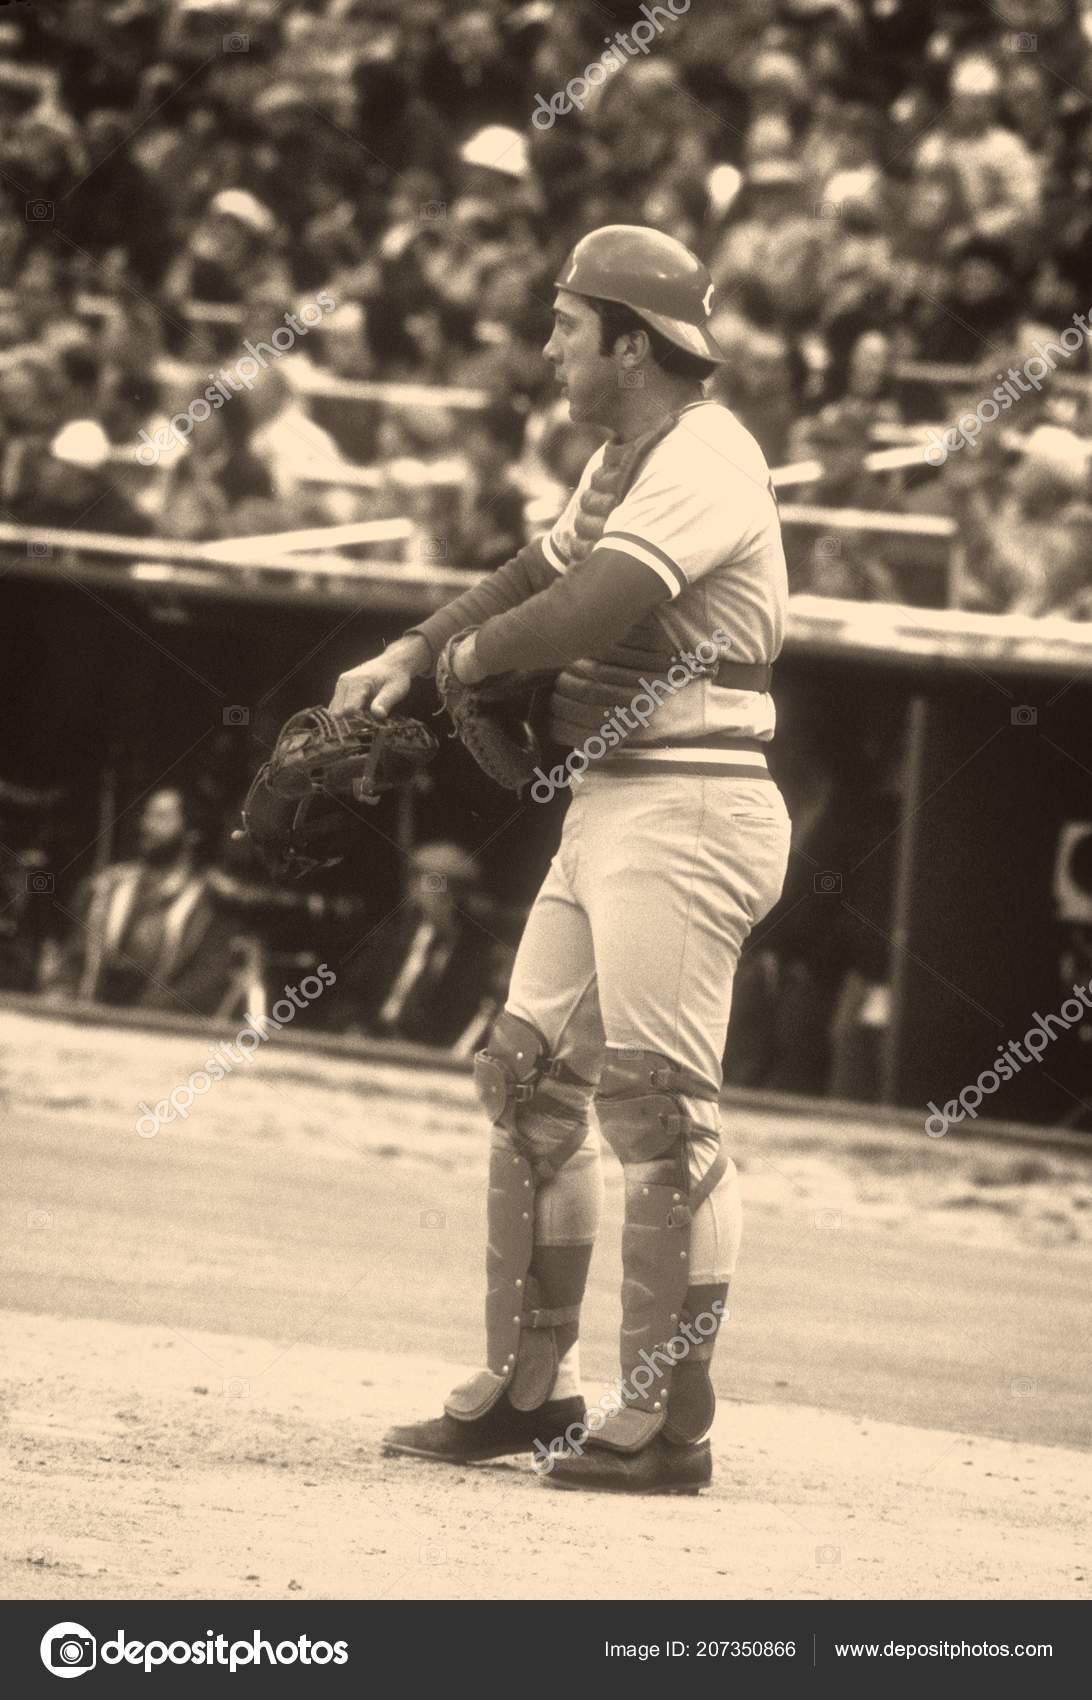 Catcher Johnny Bench of the Cincinnati Reds bats against the